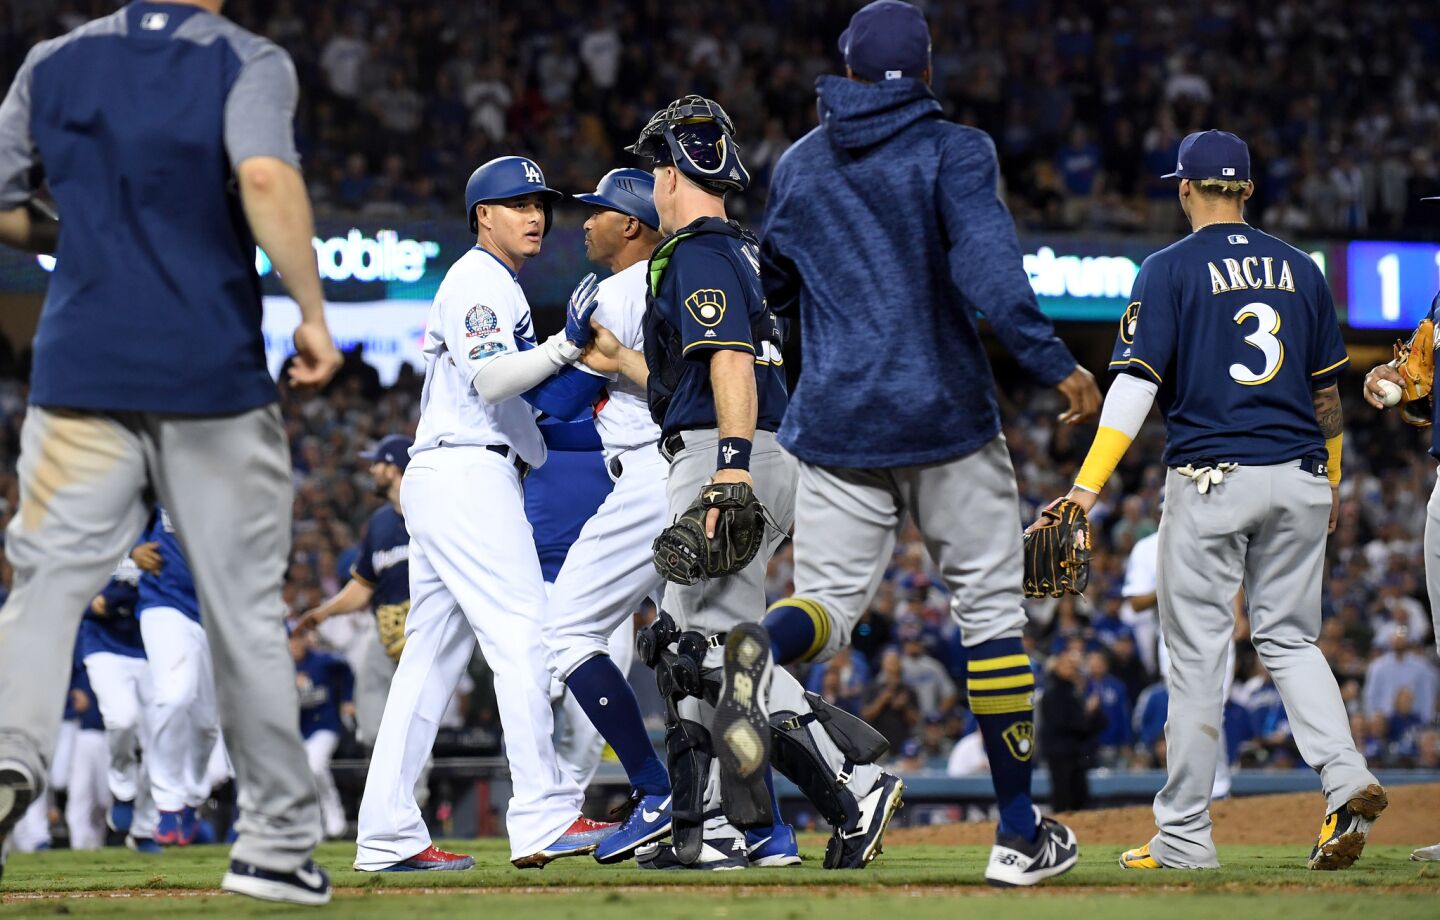 Dodgers Manny Machado has to be held back by 1st base coach George Lombard after an argument with Brewers 1st baseman Jesus Aguilar.